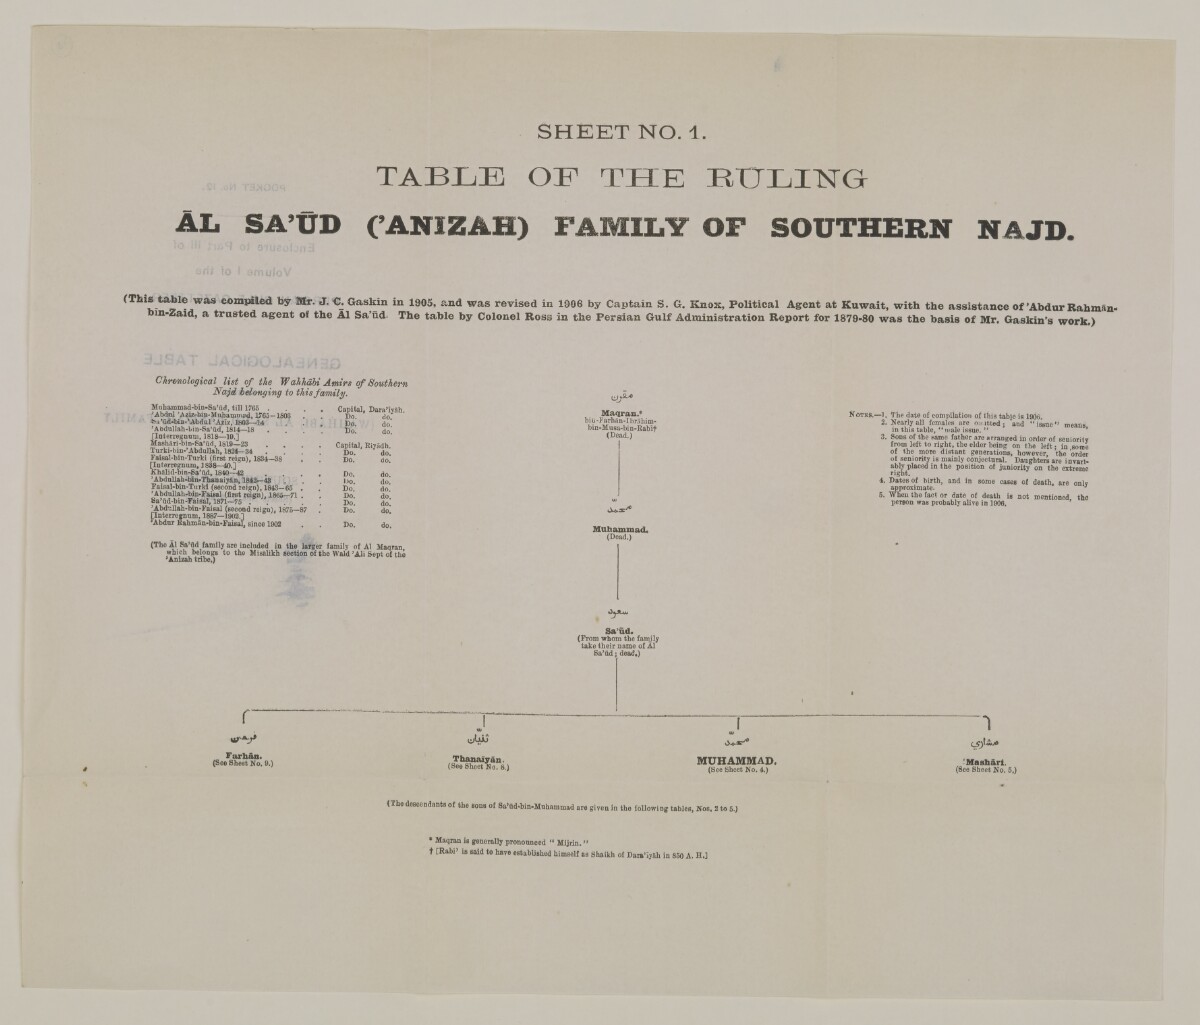 'Pocket No. 12: Enclosure to Part III of Volume I of the Persian Gulf Gazetteer: Genealogical Table of the (Wahhābi) Āl Sa’ūd (’Anizah) Family of Southern Najd (Sheets Nos. 1, 2 and 3.)' [Sheet No. 1] [&lrm;14v] (2/2)